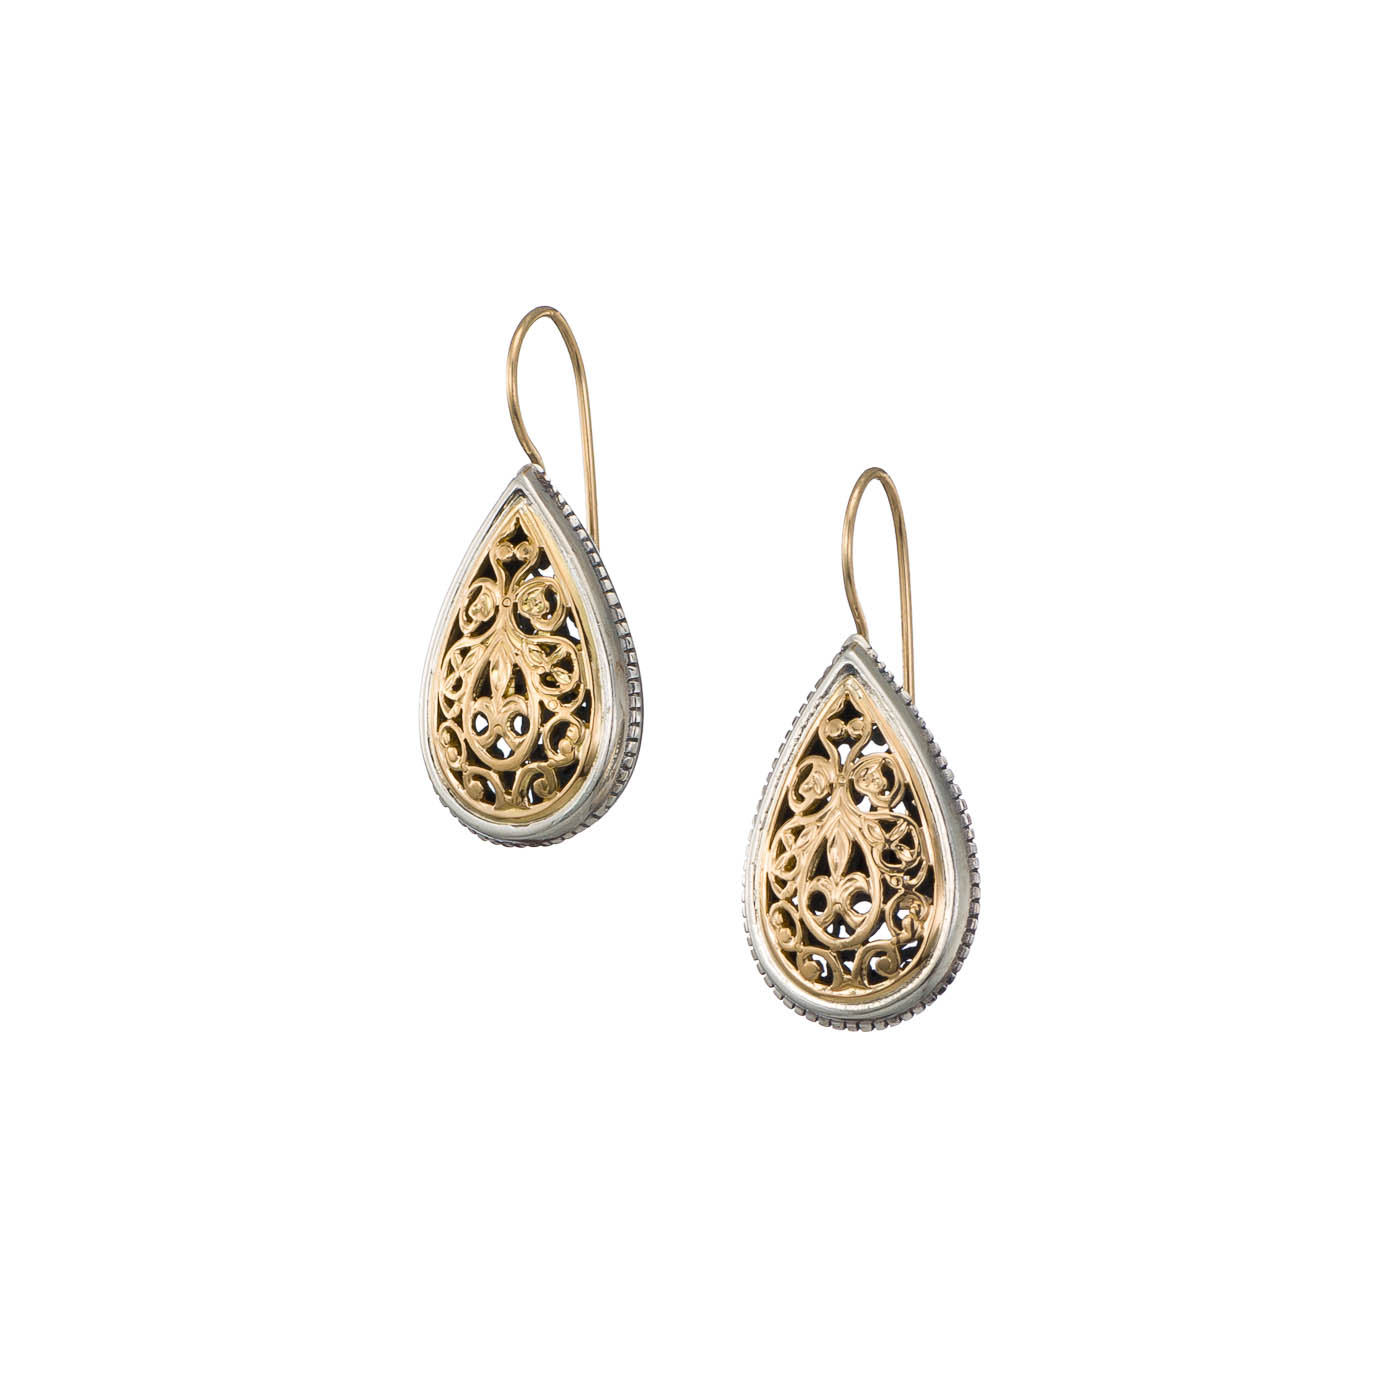 Garden Shadows Drop Earrings in 18K Gold and Sterling Silver